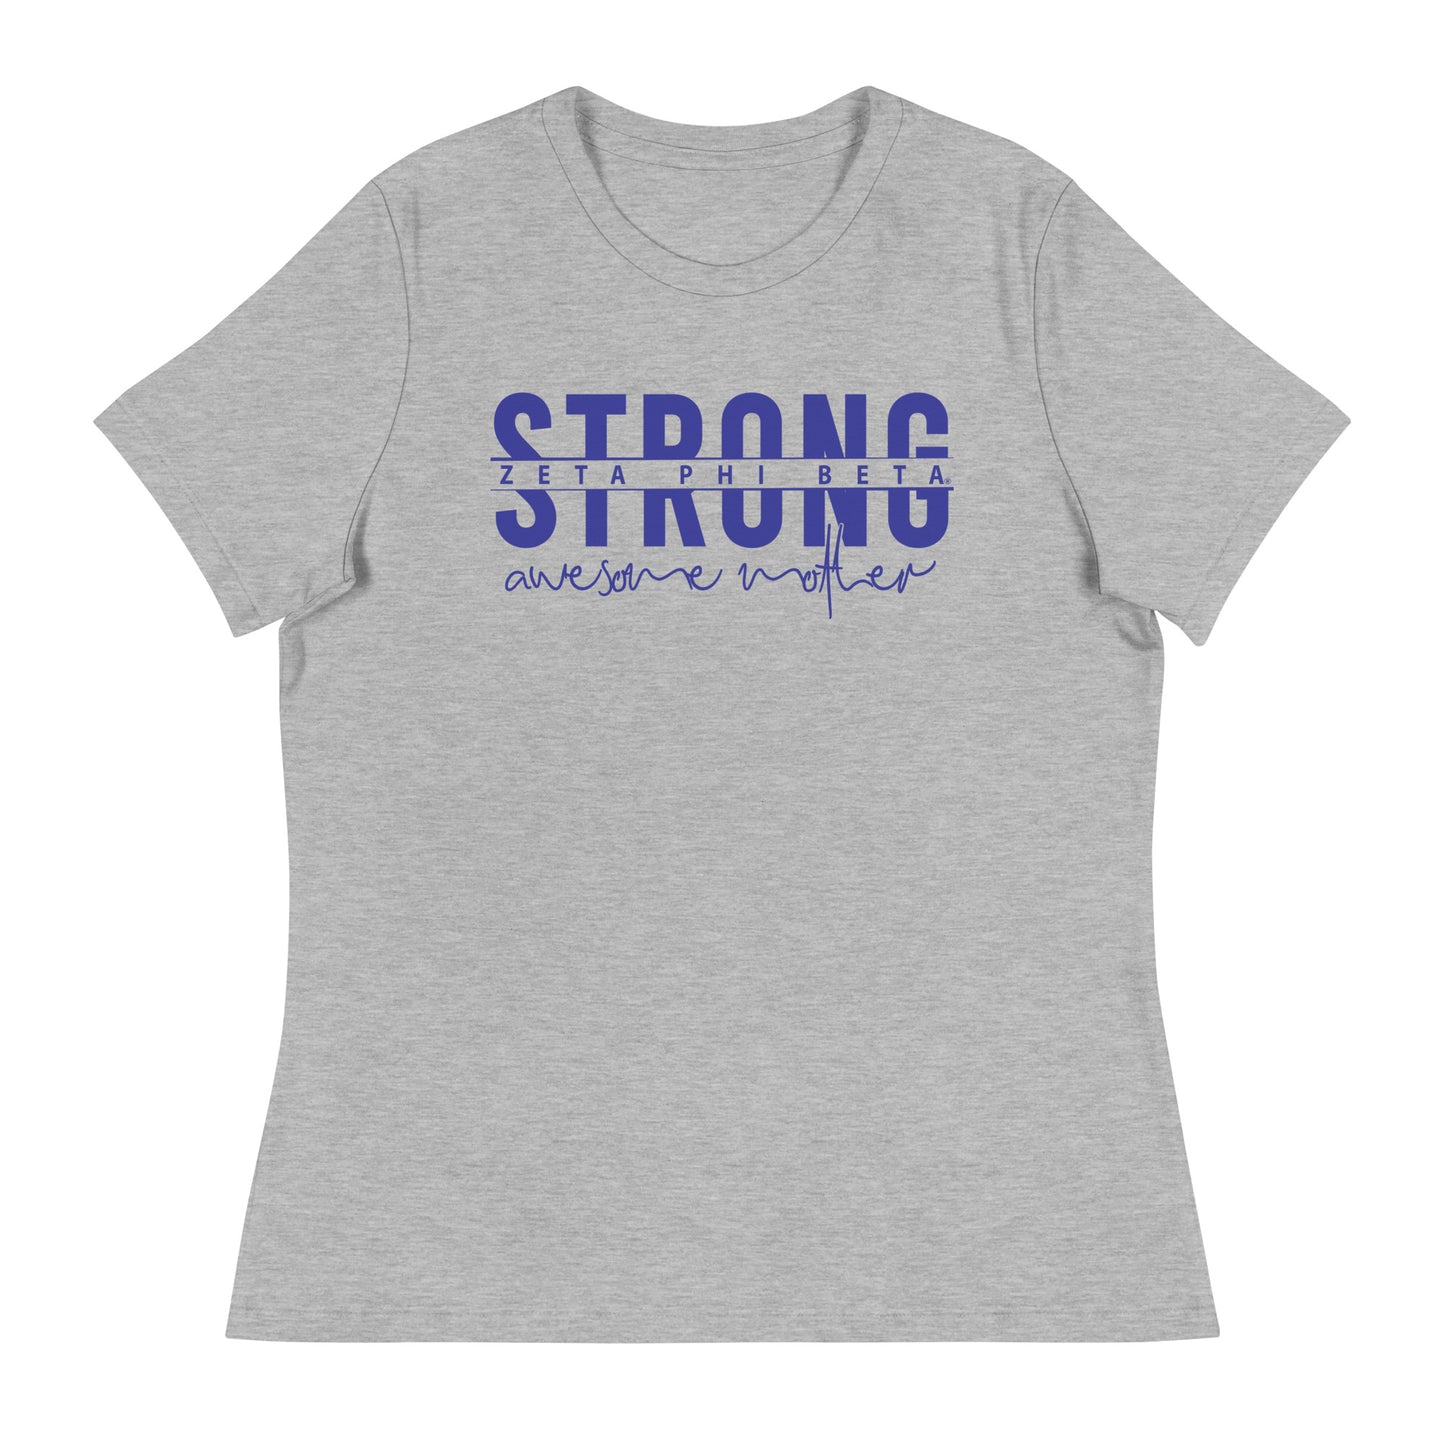 Zeta Phi Beta Strong Awesome Mother Women's Relaxed T-Shirt